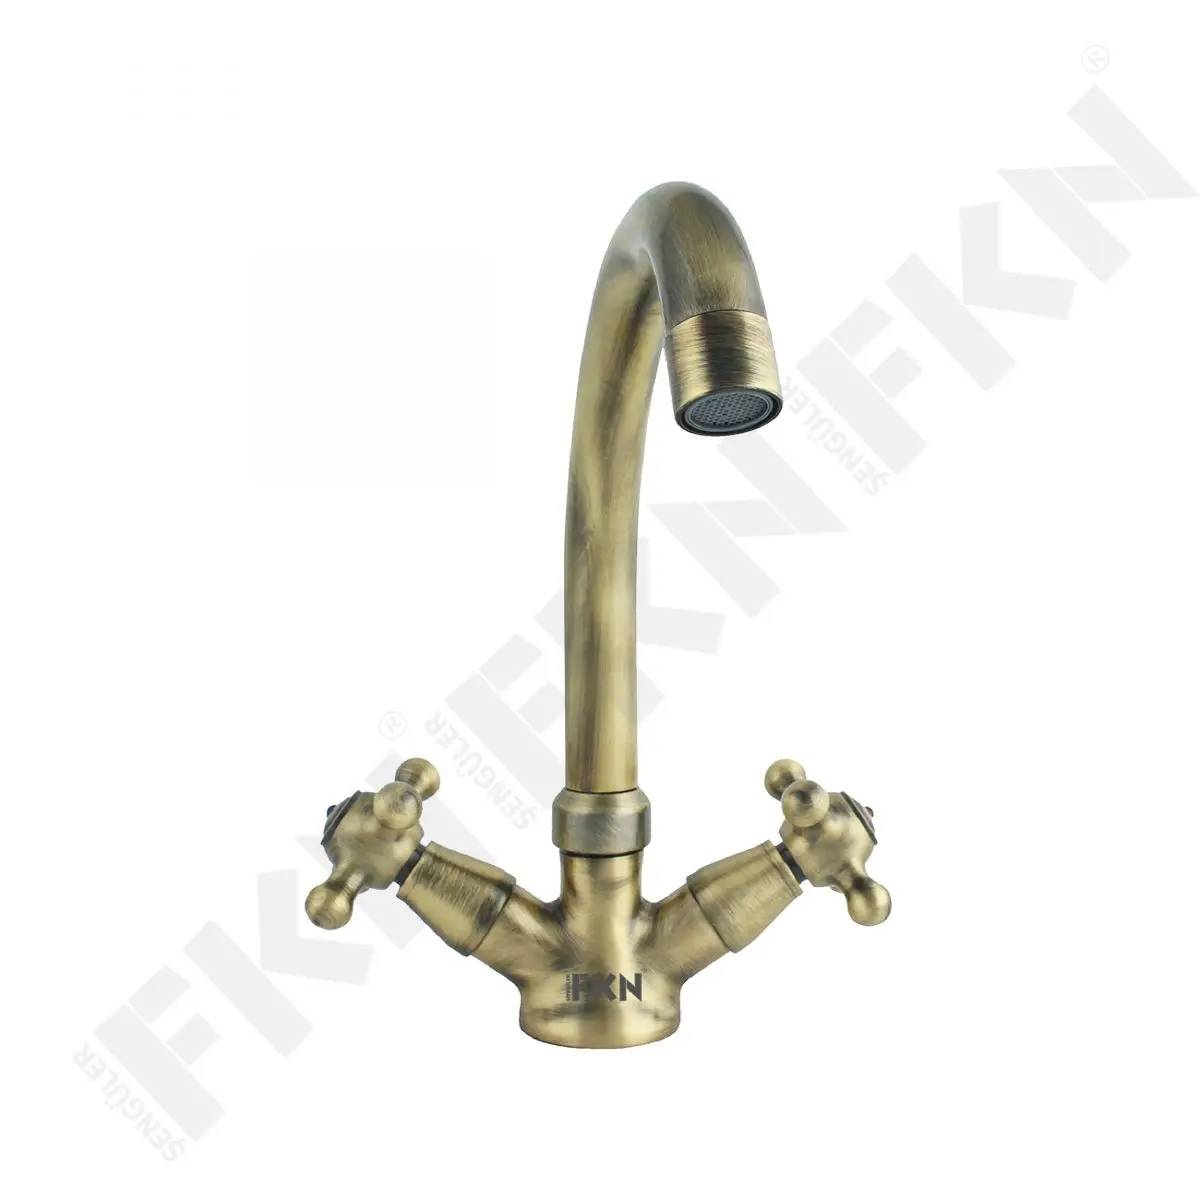 

FKN Solid Brass Kitchen Bathroom Faucet Traditional Gold Dual Holder Single Hole Basin Mixer Deck Mounted Hot Cold Water Bathroom Taps Kitchen Faucets - FKN01039710